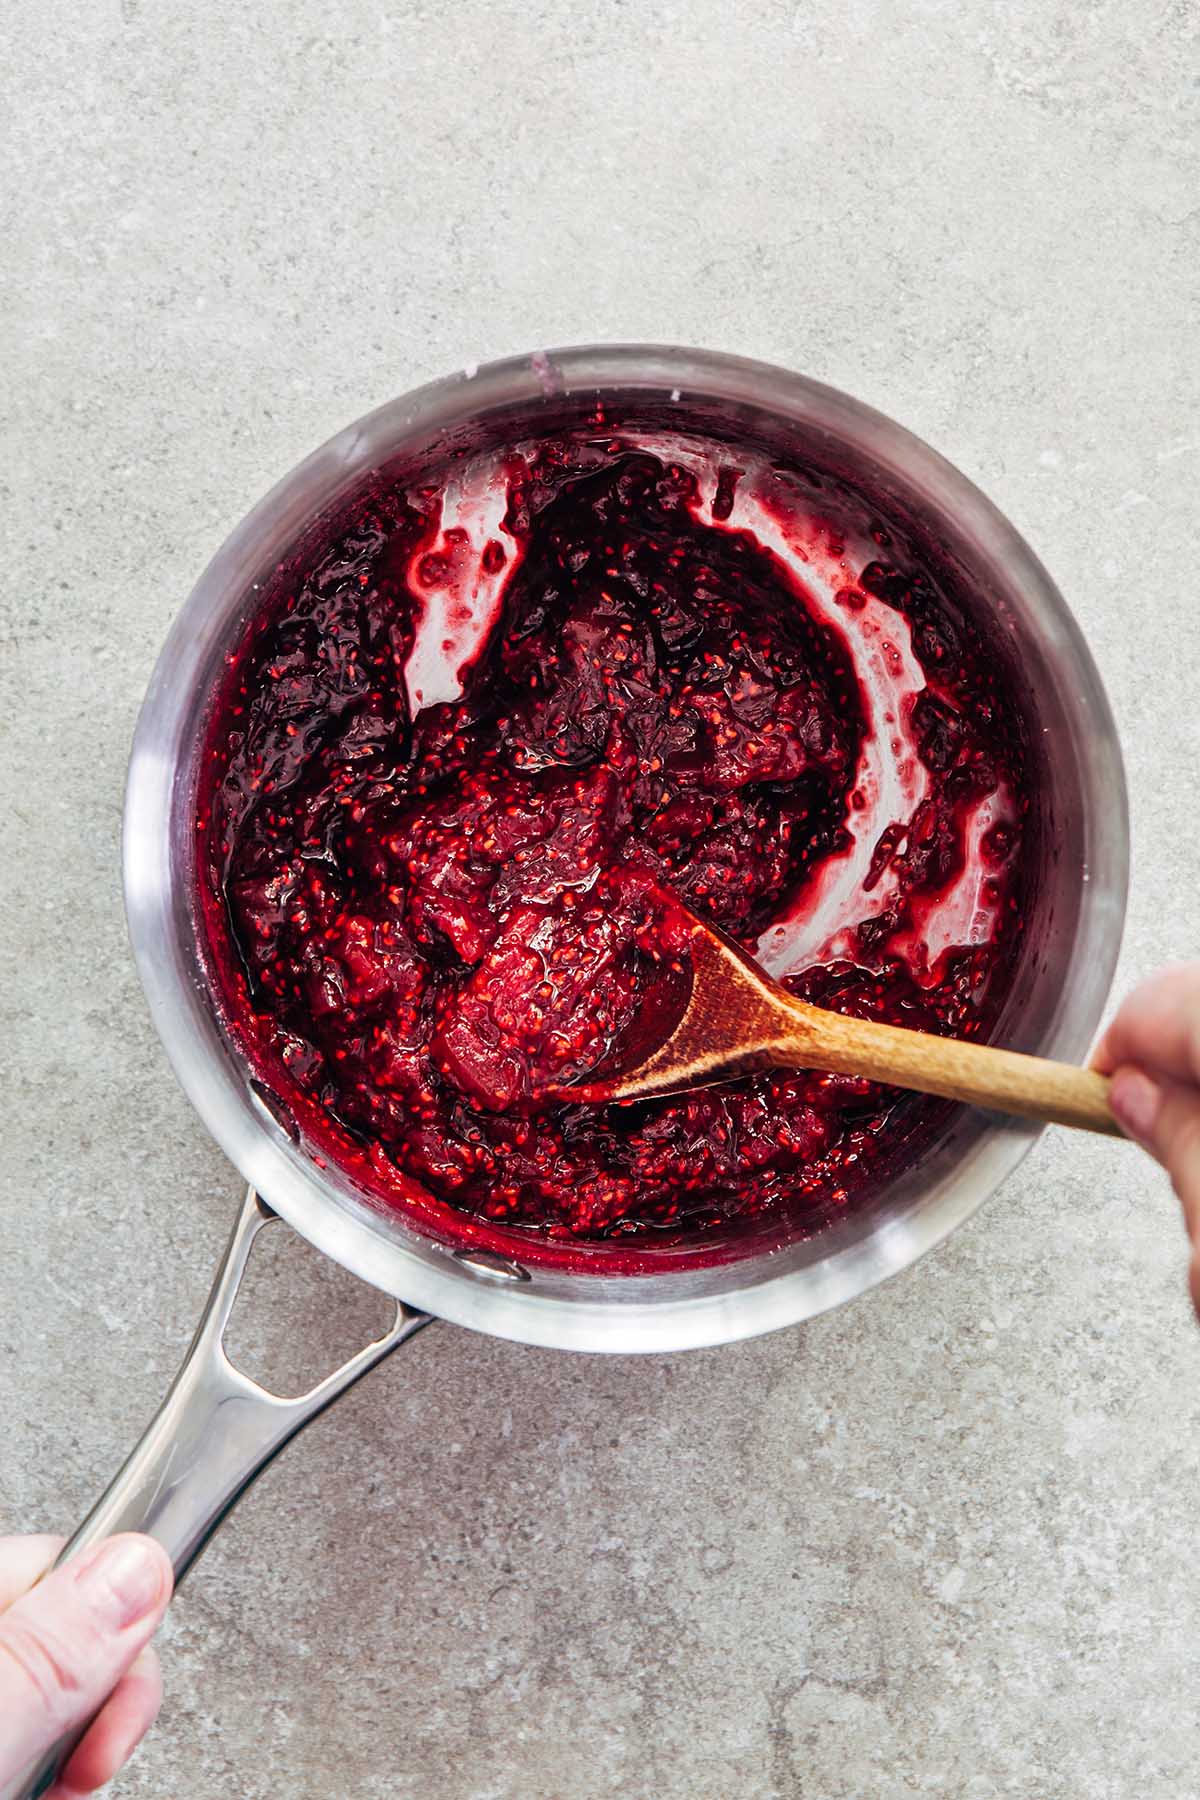 Cooked jam in a pot on a stone surface being stirred with a wooden spoon.